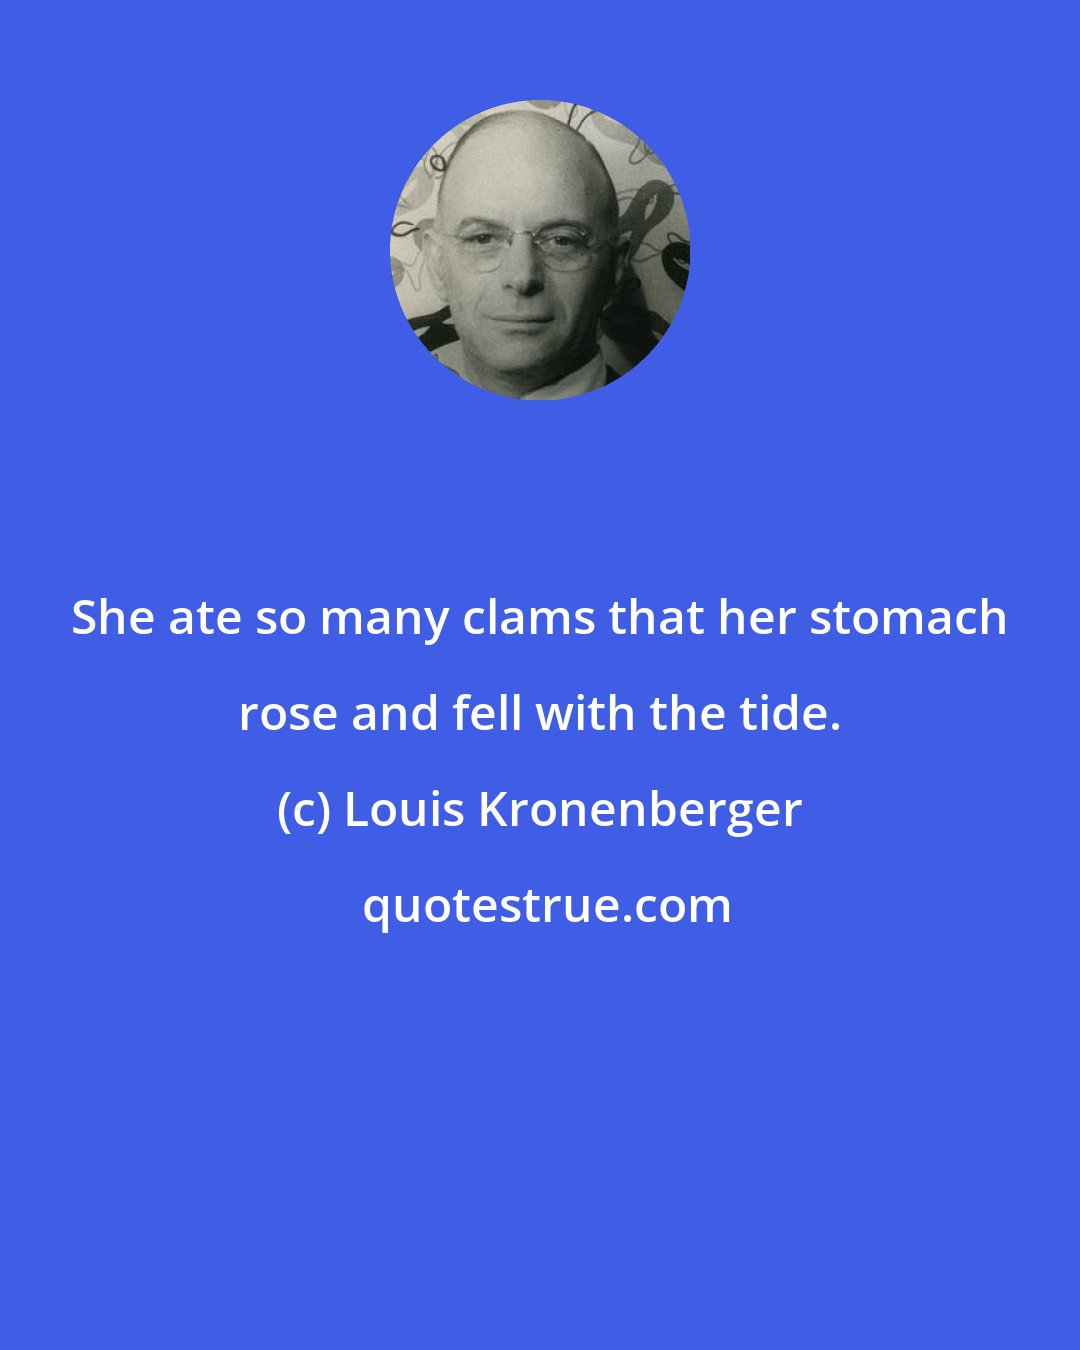 Louis Kronenberger: She ate so many clams that her stomach rose and fell with the tide.